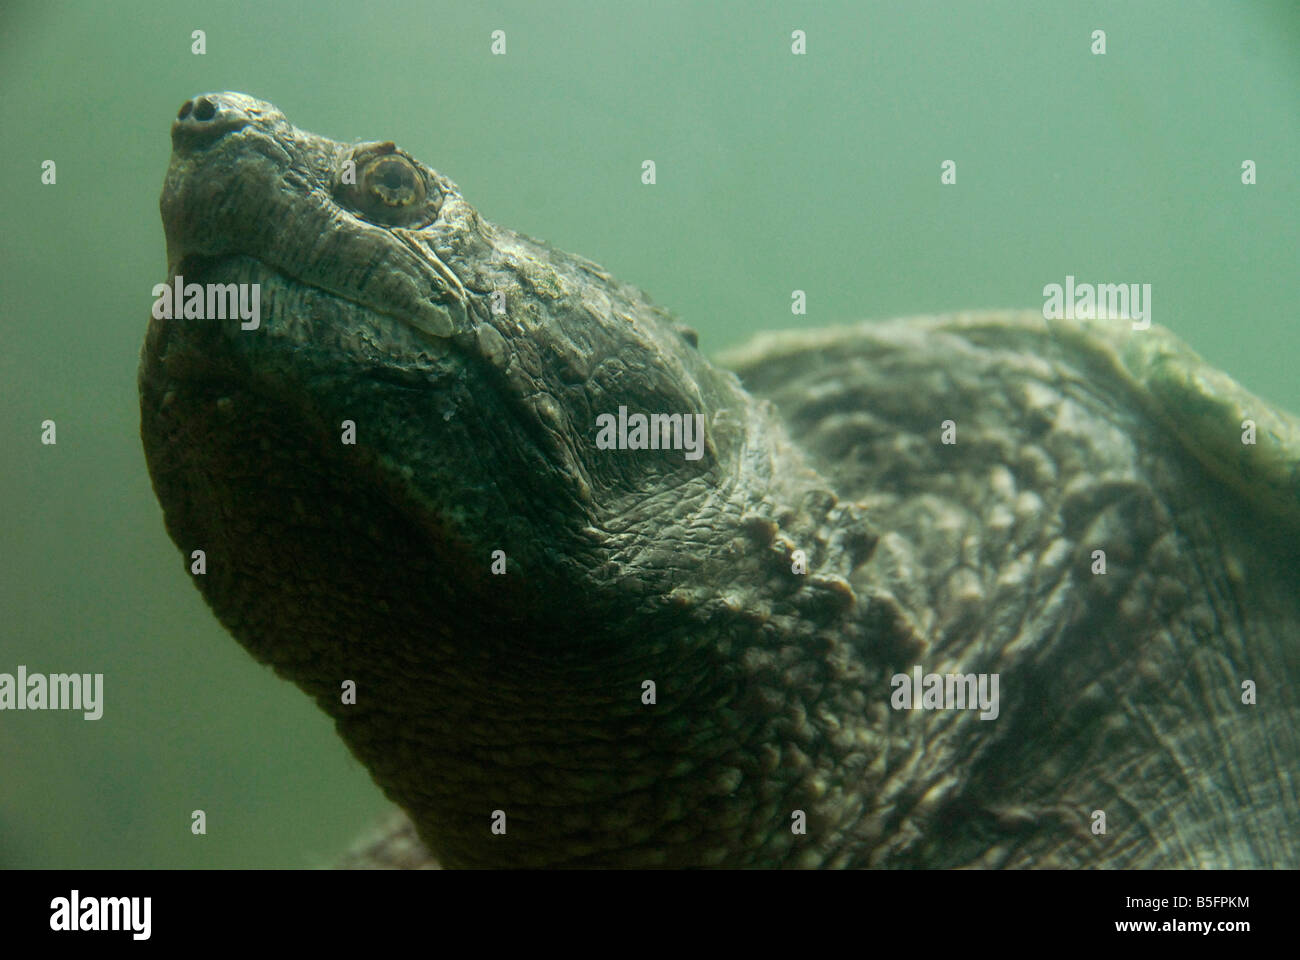 Head and neck detail of a large Snapping turtle as it gets ready to surface Stock Photo